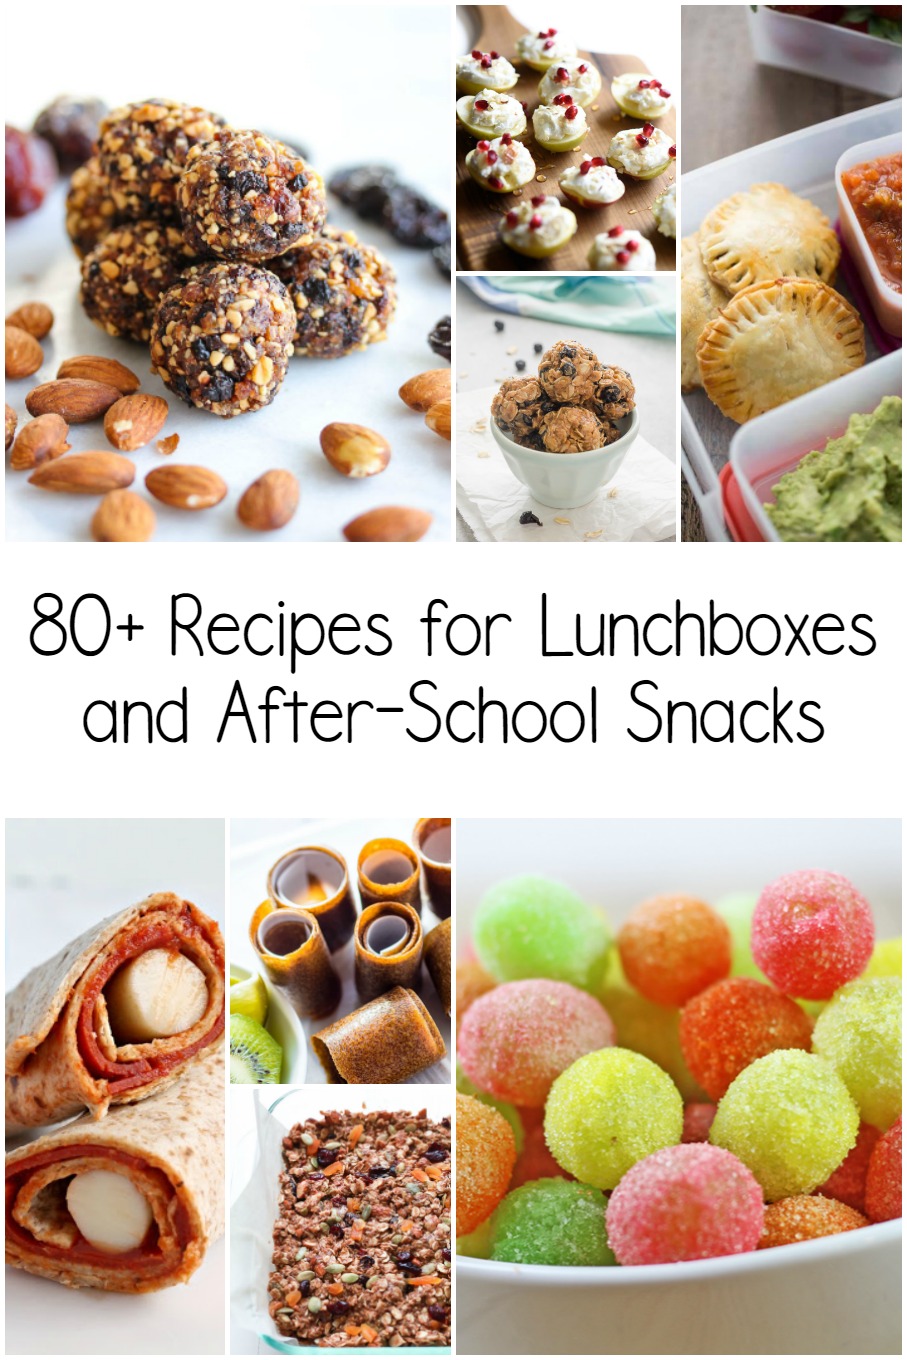 It's back-to-school time! I've compiled more than 80 recipes to include in your child's lunchbox, or serve as an after-school snack.